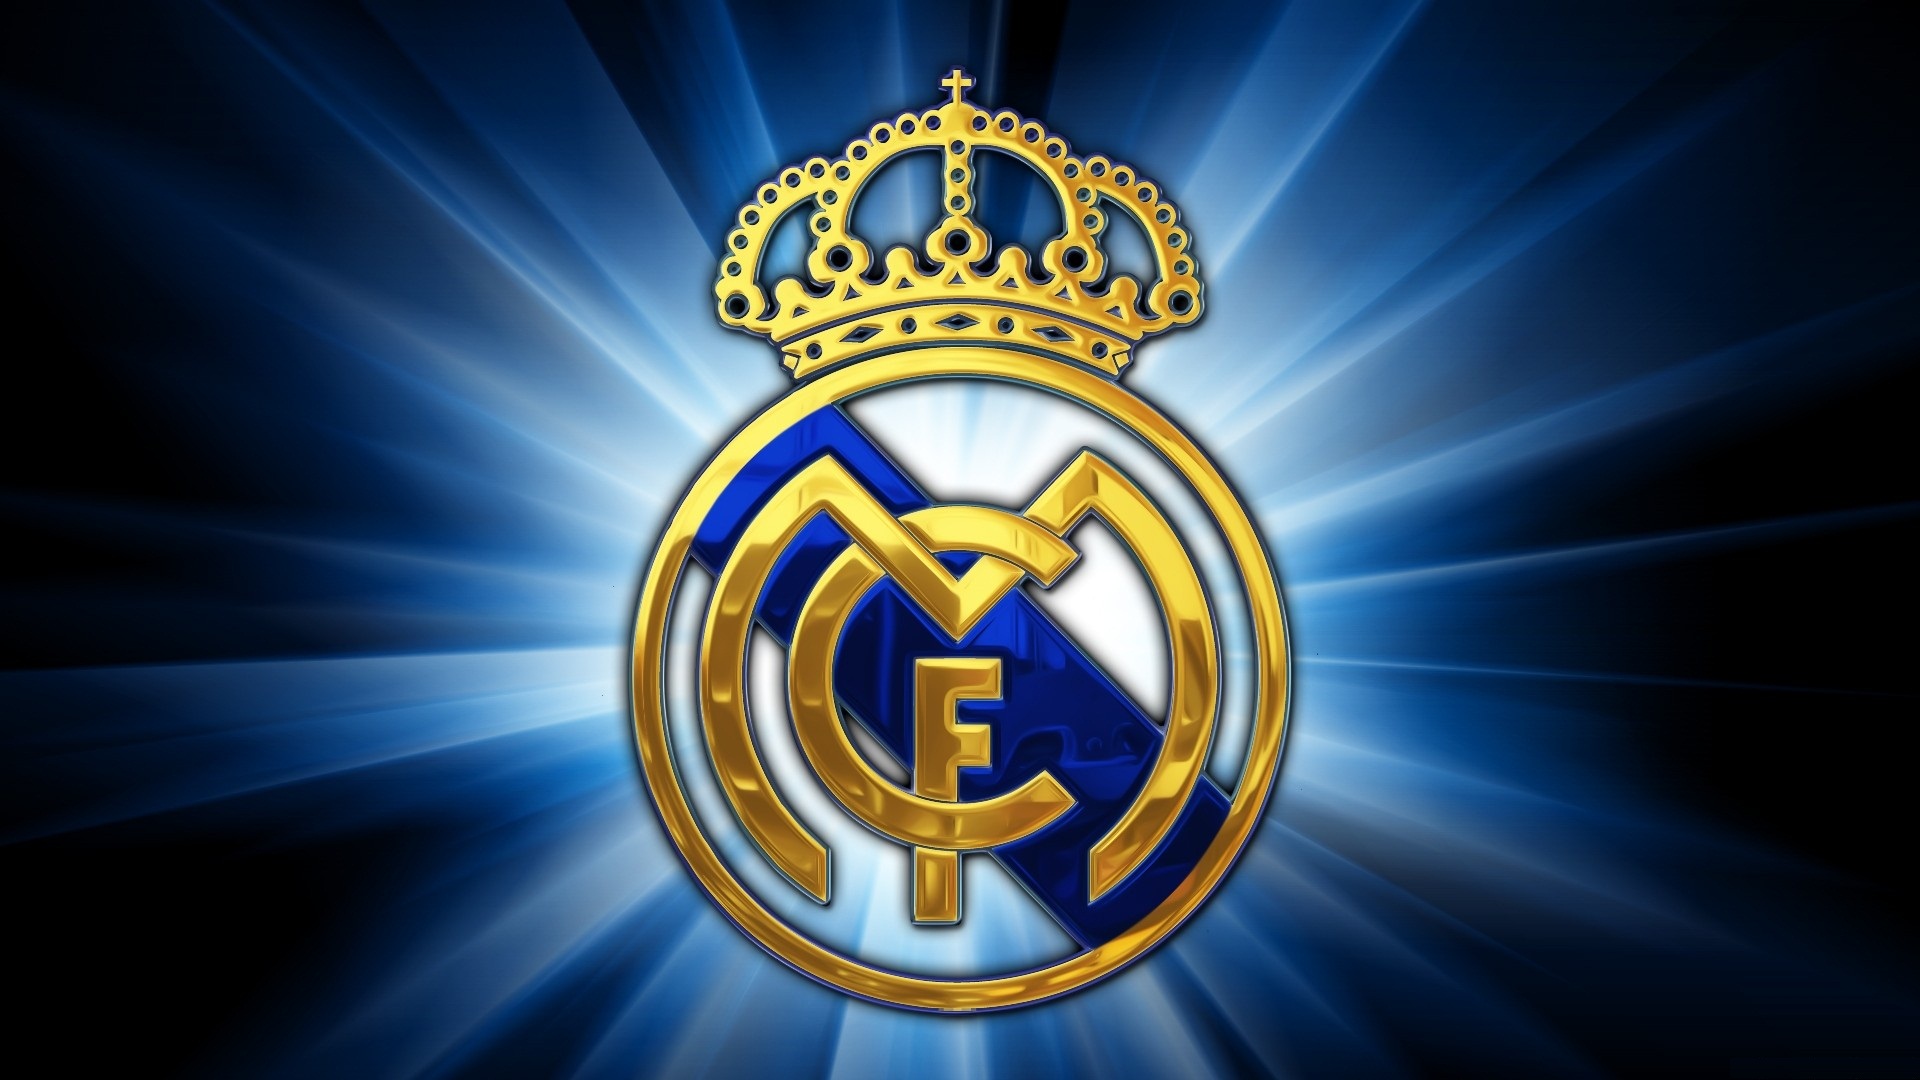 Real Madrid Wallpaper For Mac with resolution 1920x1080 pixel. You can make this wallpaper for your Mac or Windows Desktop Background, iPhone, Android or Tablet and another Smartphone device